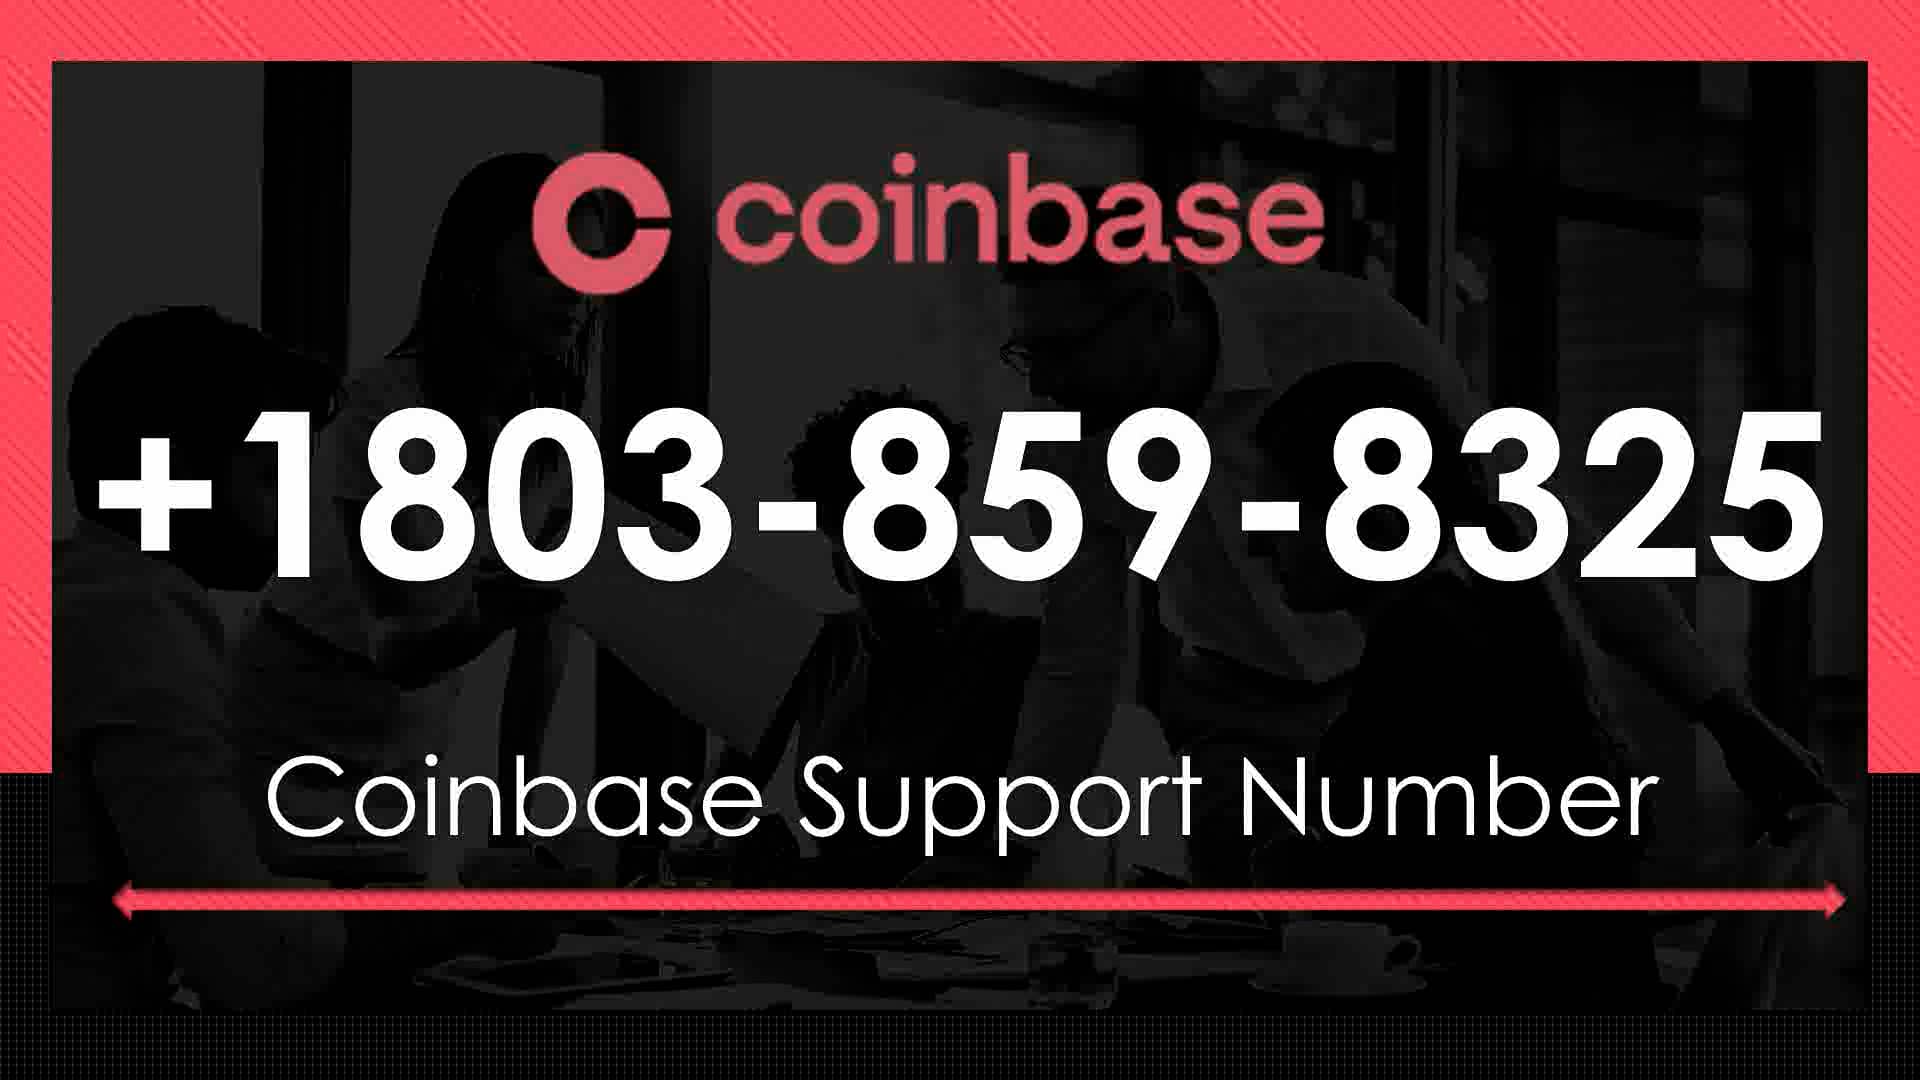 Coinbase Supp0rt Number +1+803+859+8325+ D21$ (131) on Vimeo